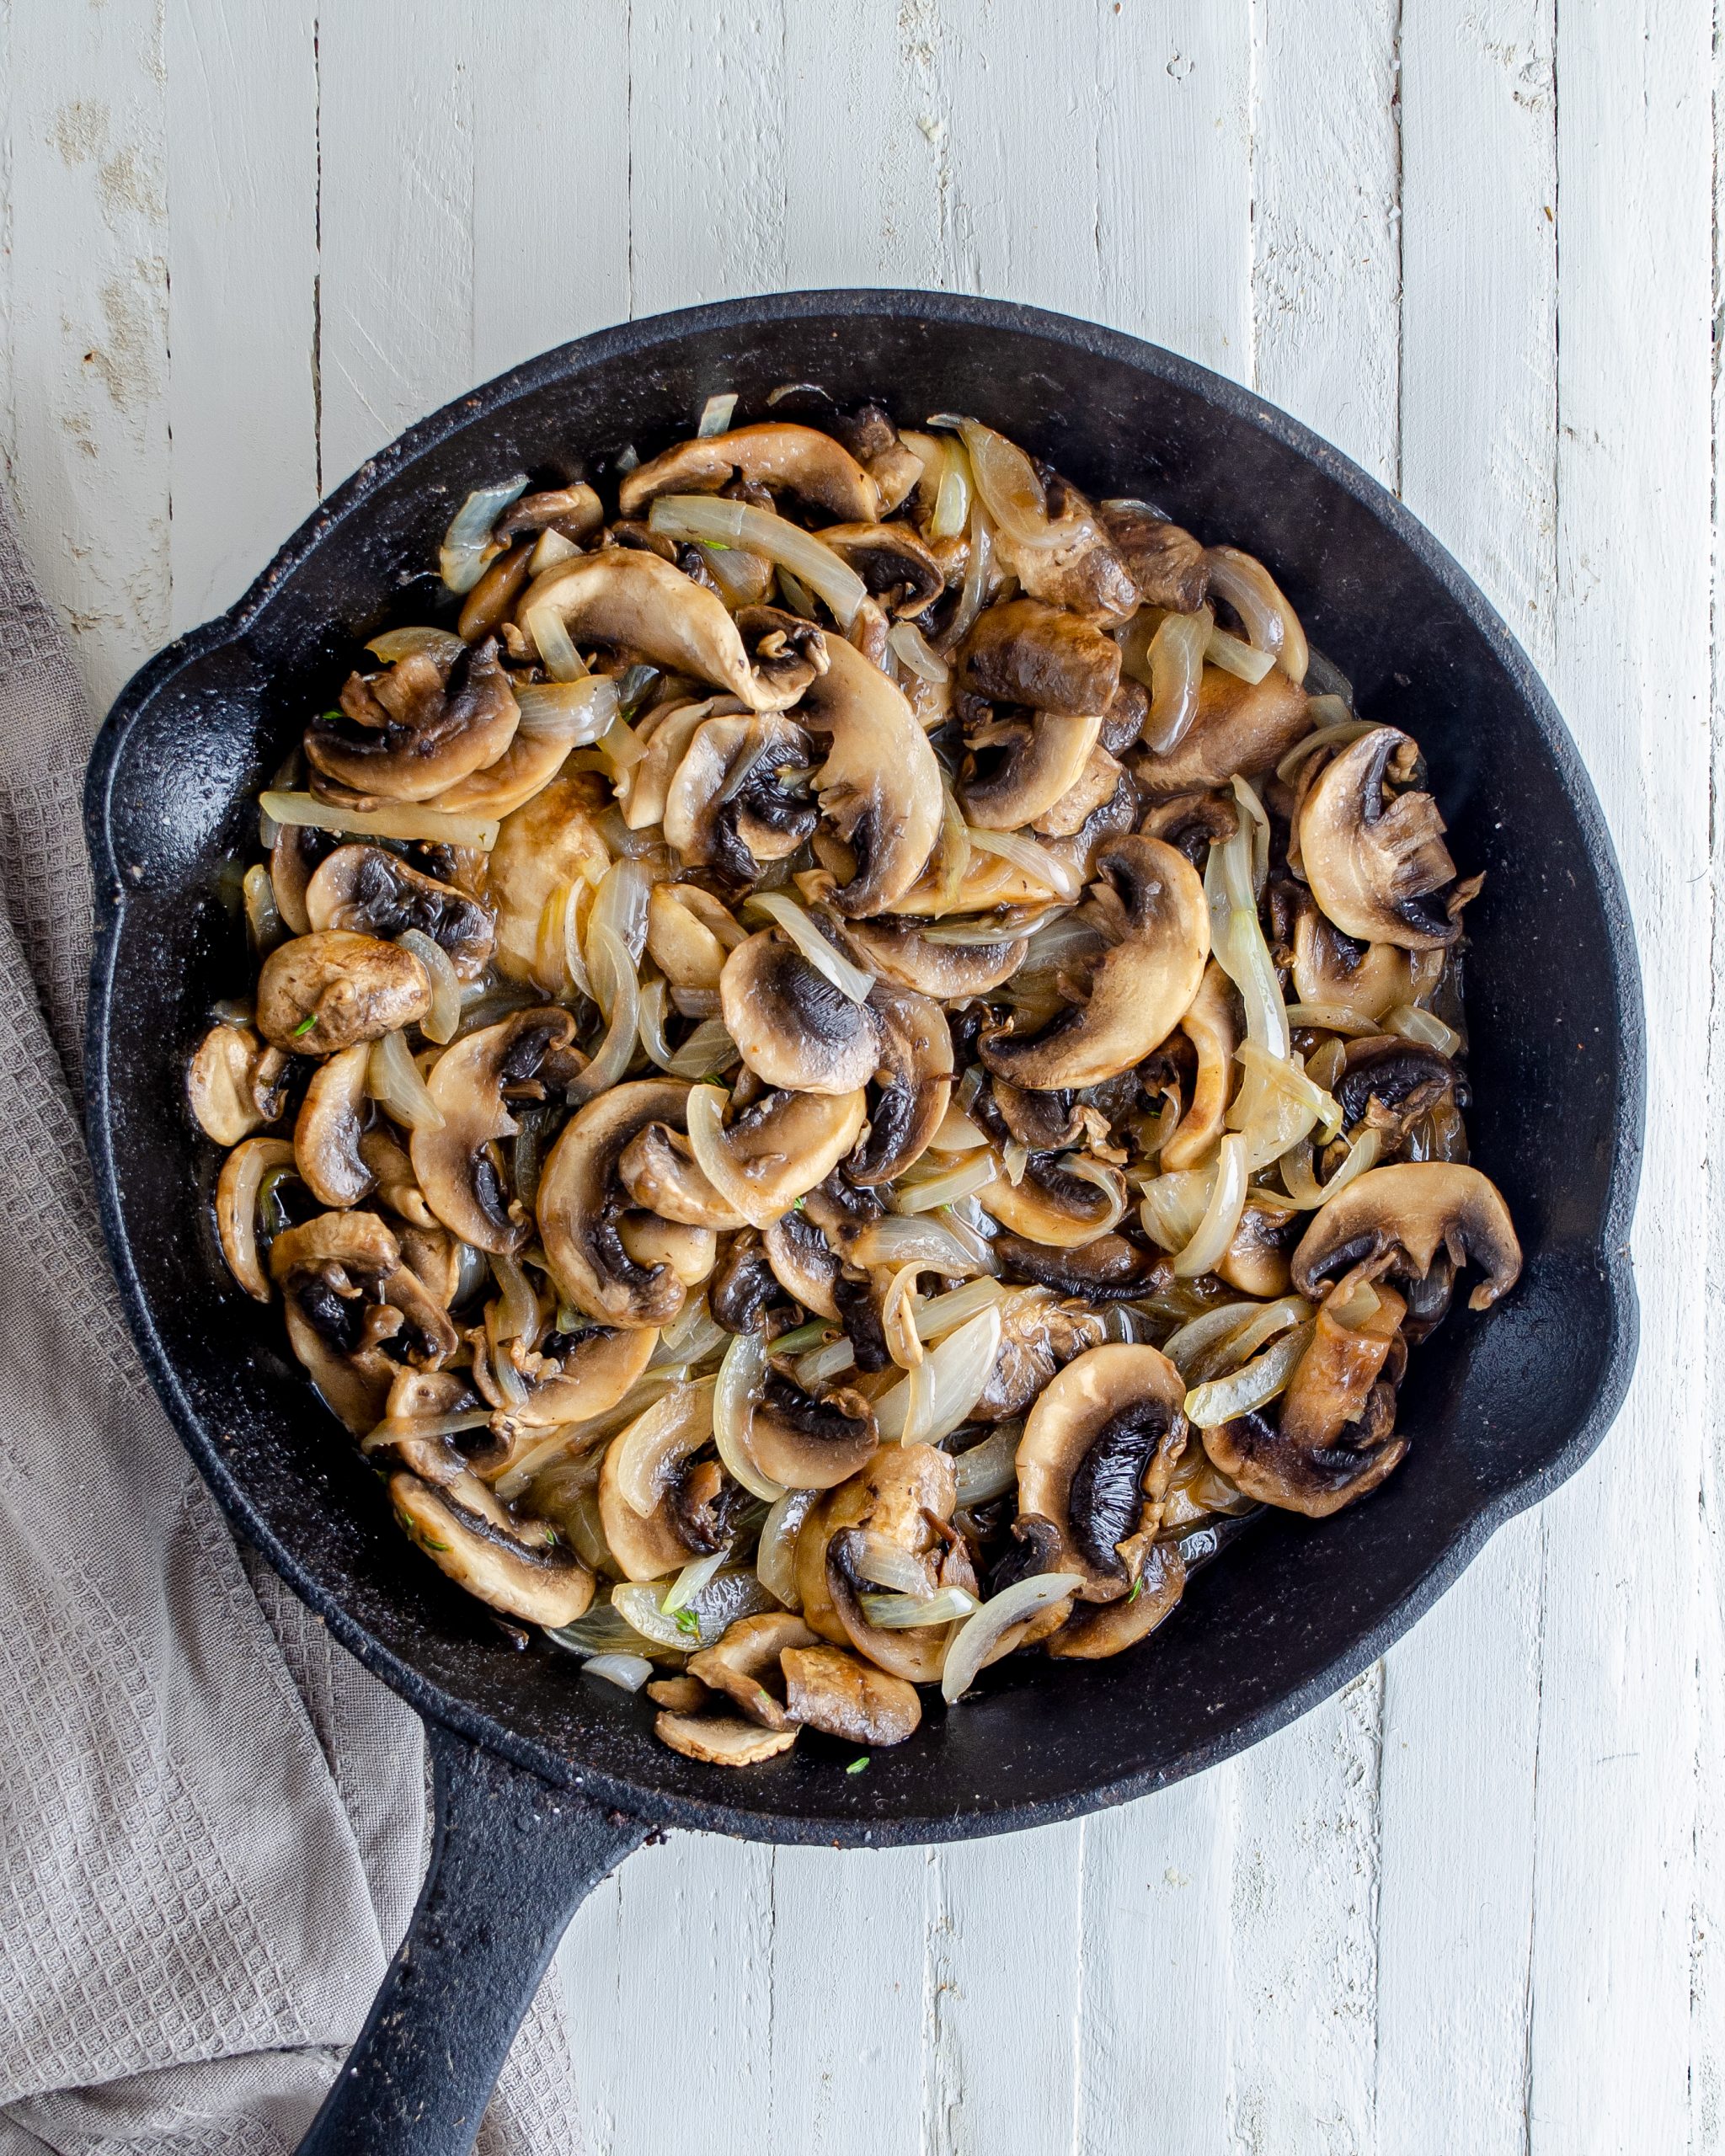 Mix in the mushrooms and onions., and saute until softened. 